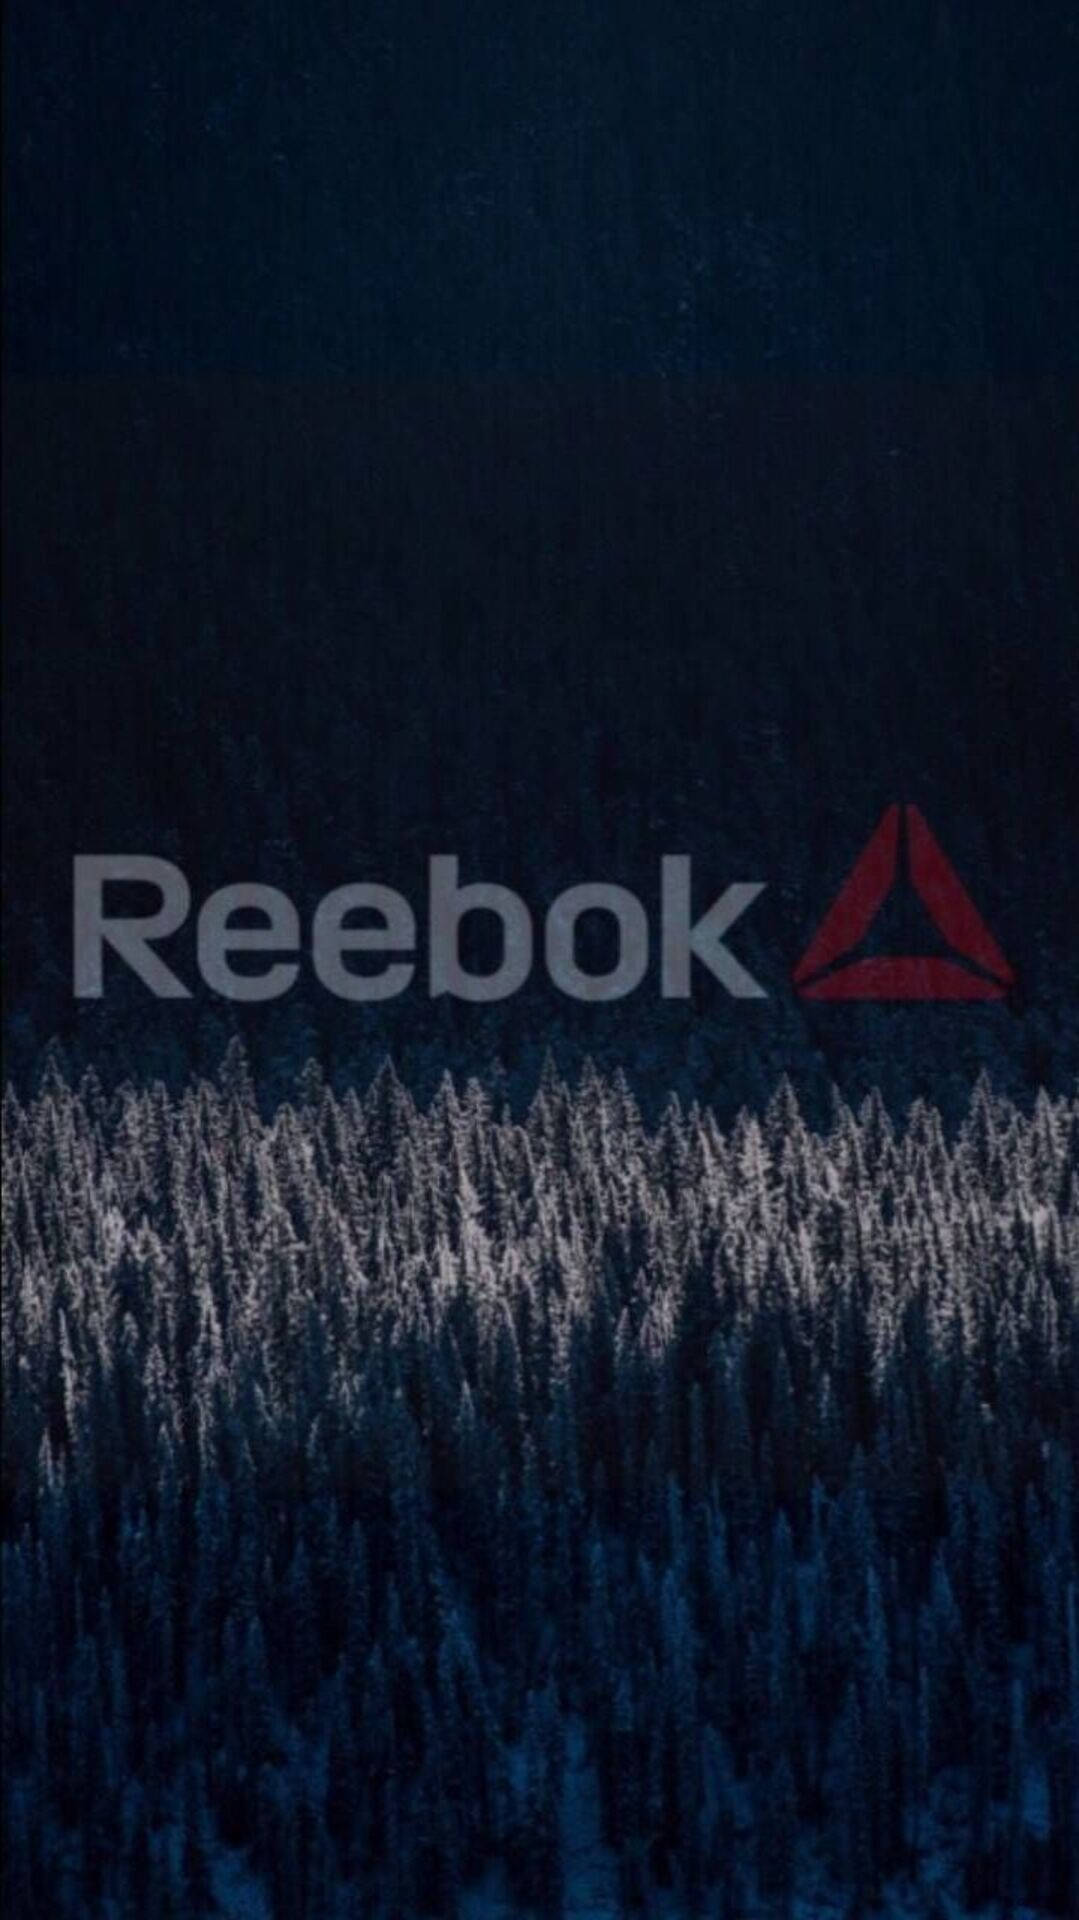 Reebok Logo With Lavender Field Phone Background